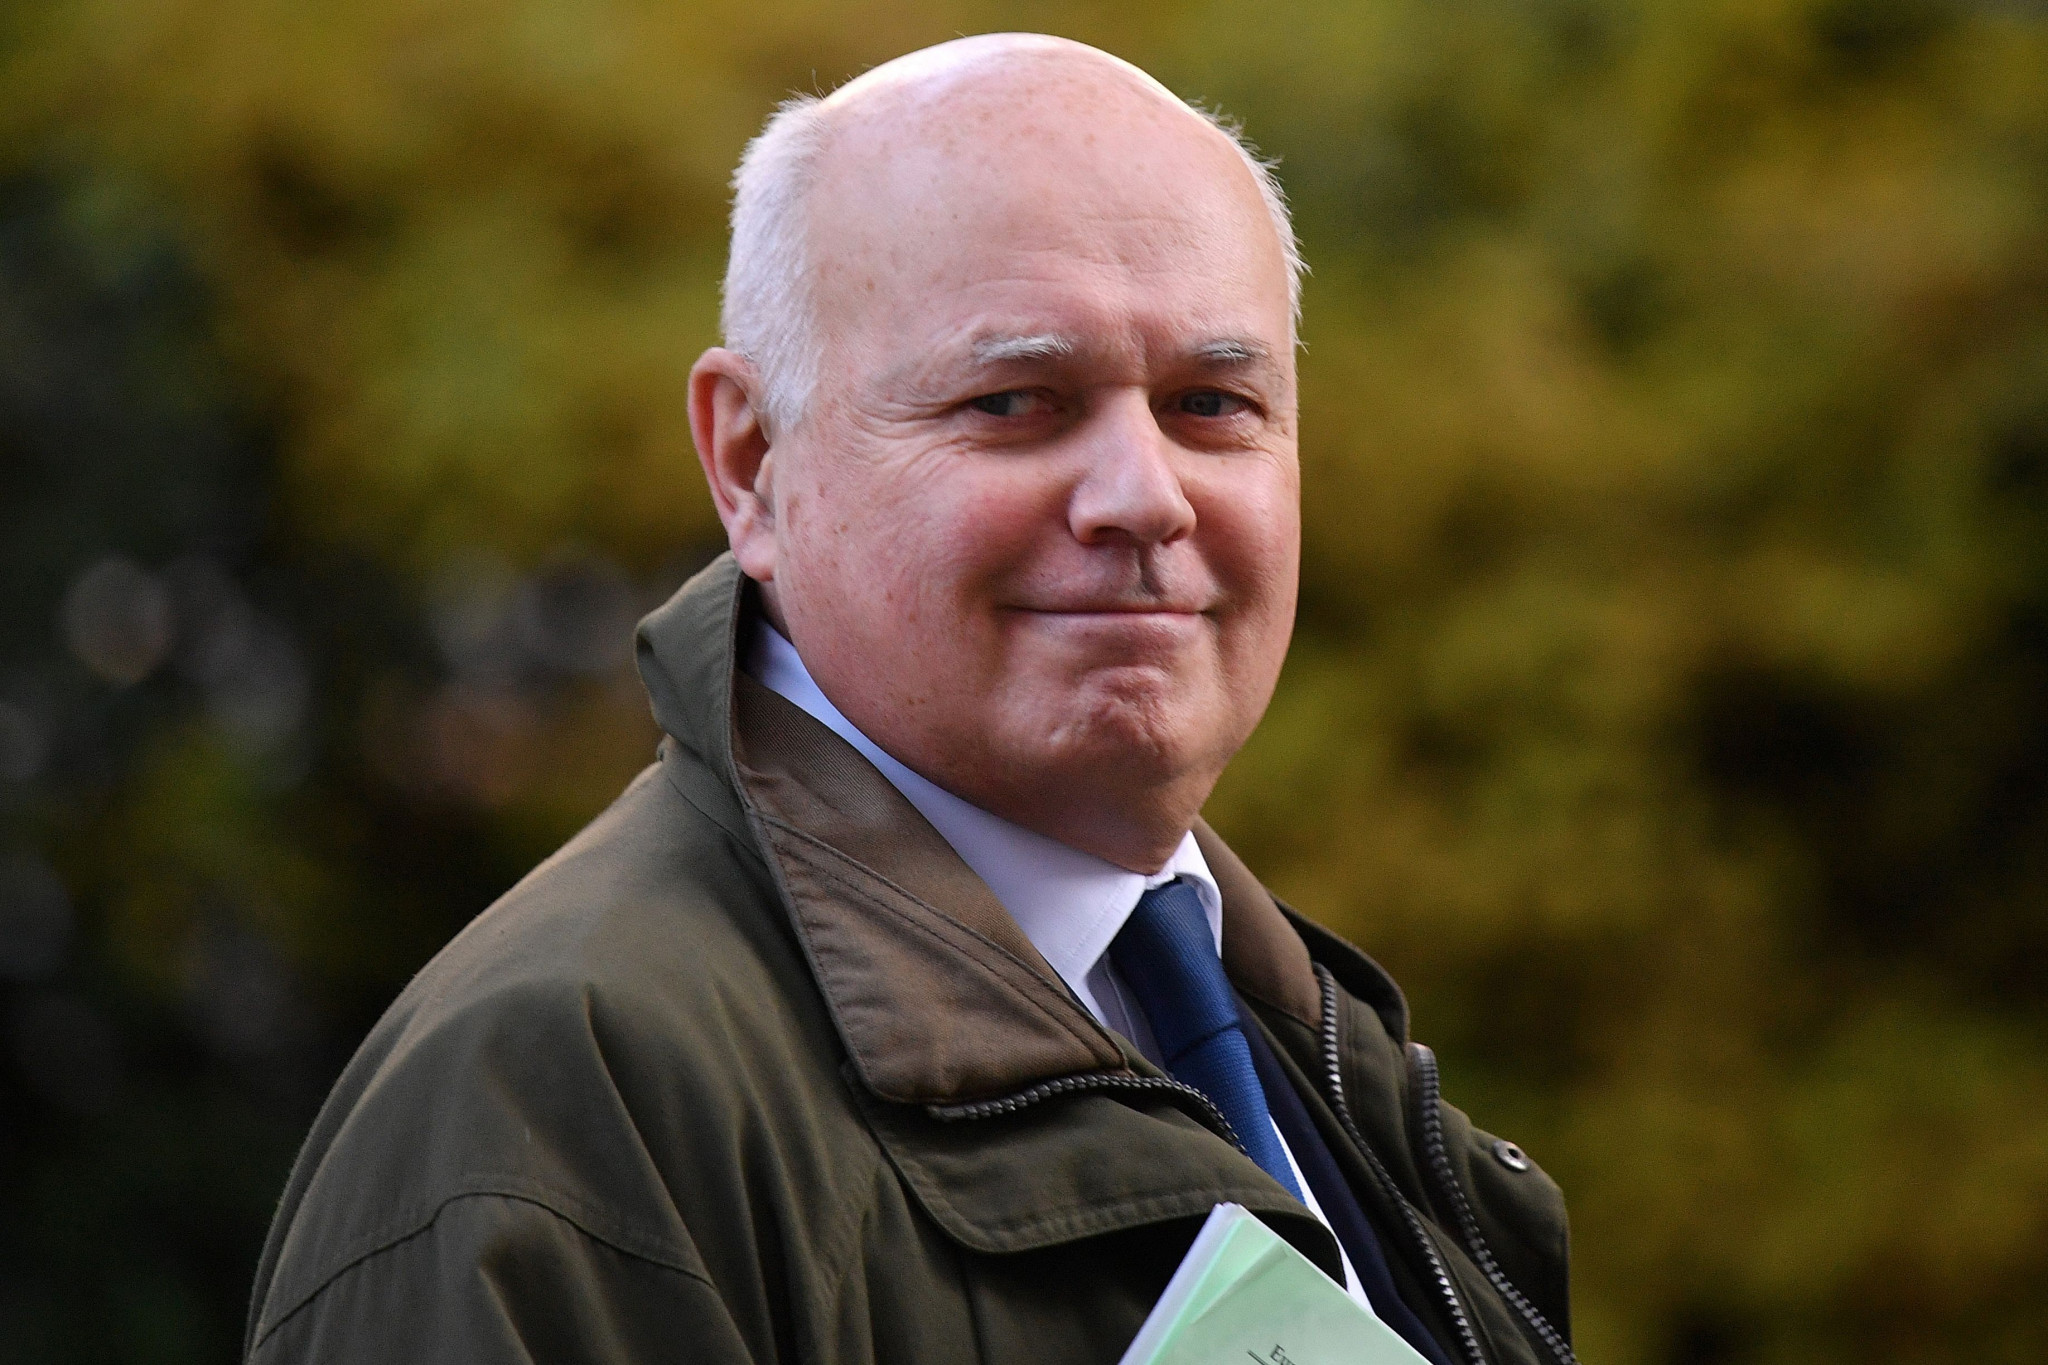 UK politician Duncan Smith calls for Government to lobby IOC to move 2022 Winter Olympics